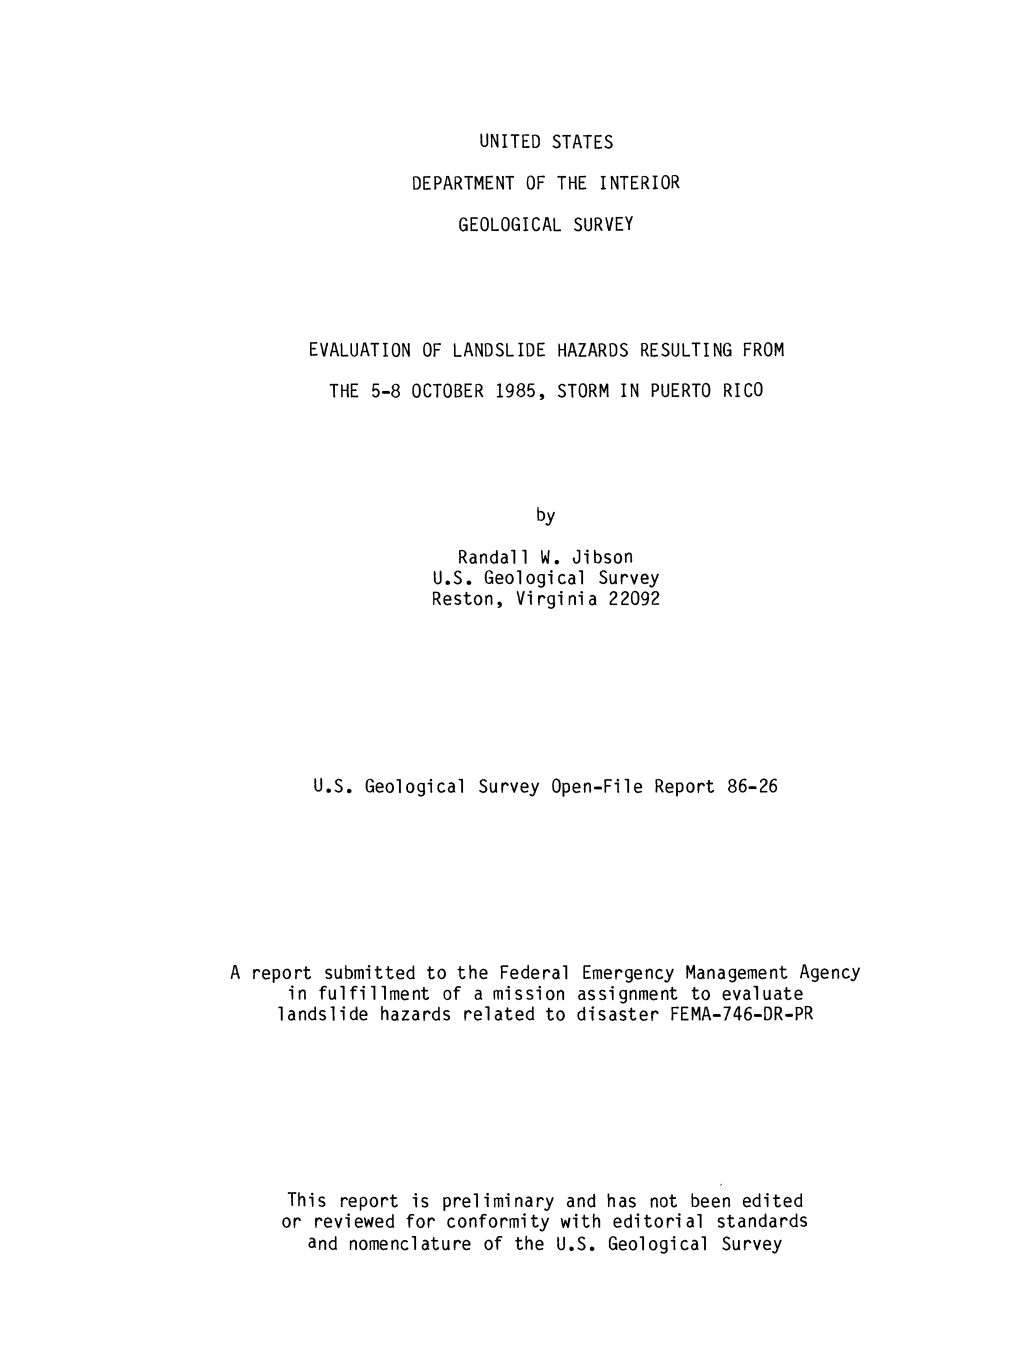 Evaluation of Landslide Hazards Resulting from the 5-8 October 1985, Storm in Puerto Rico